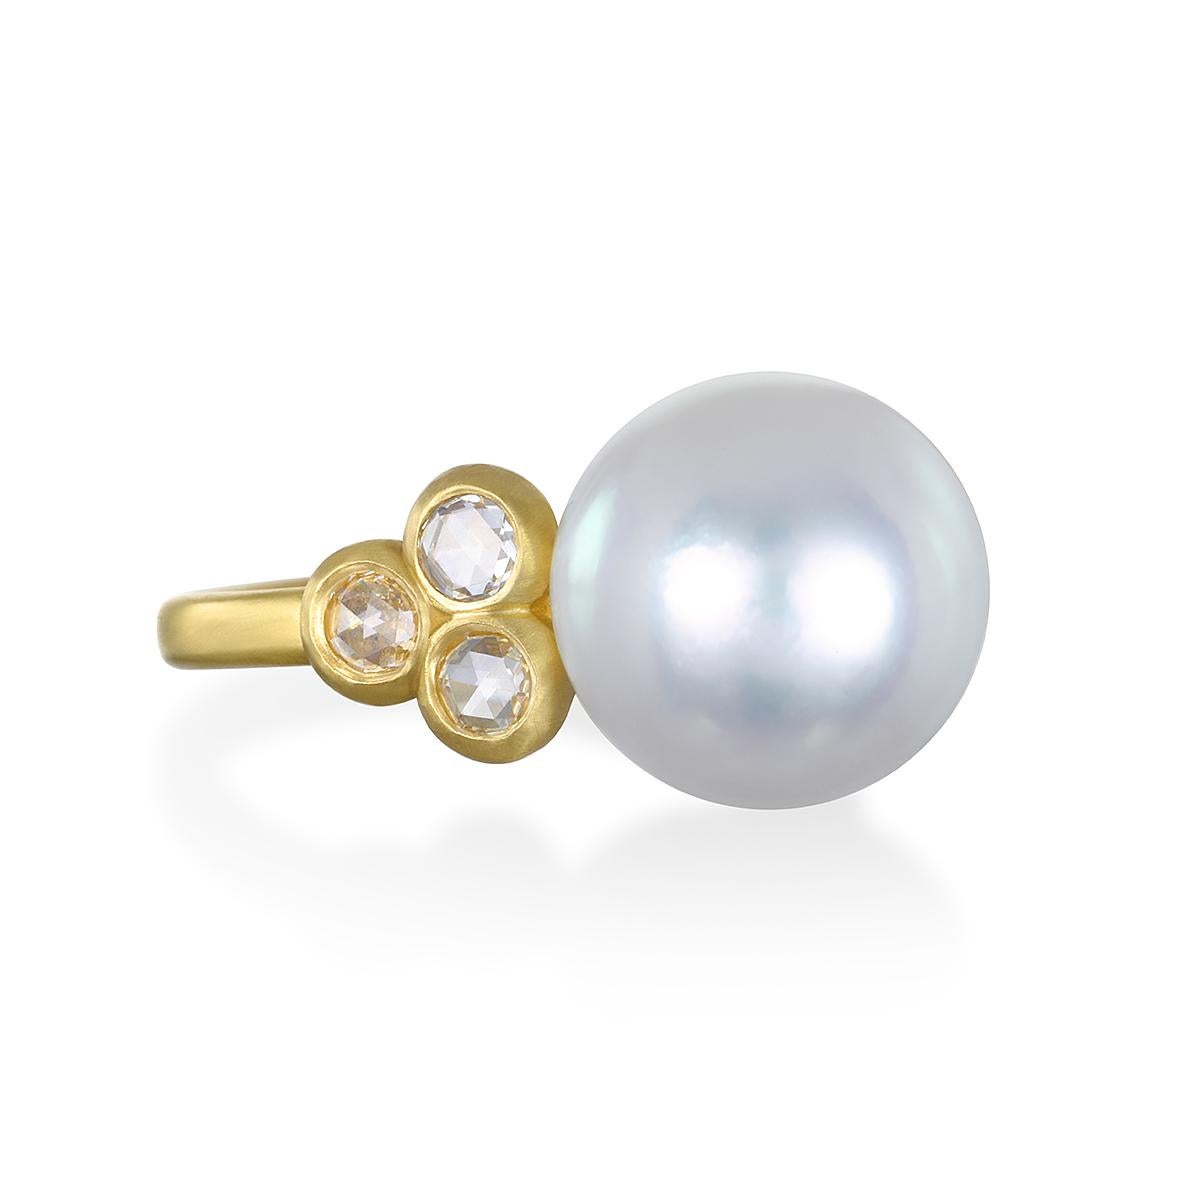 Faye Kim's 18 Karat Gold Diamond White South Sea Pearl Ring highlights the classic beauty of South Sea pearls made wearable for today's contemporary styles. Three bezel-set rose cut diamonds on either side of the pearl add just the right amount of